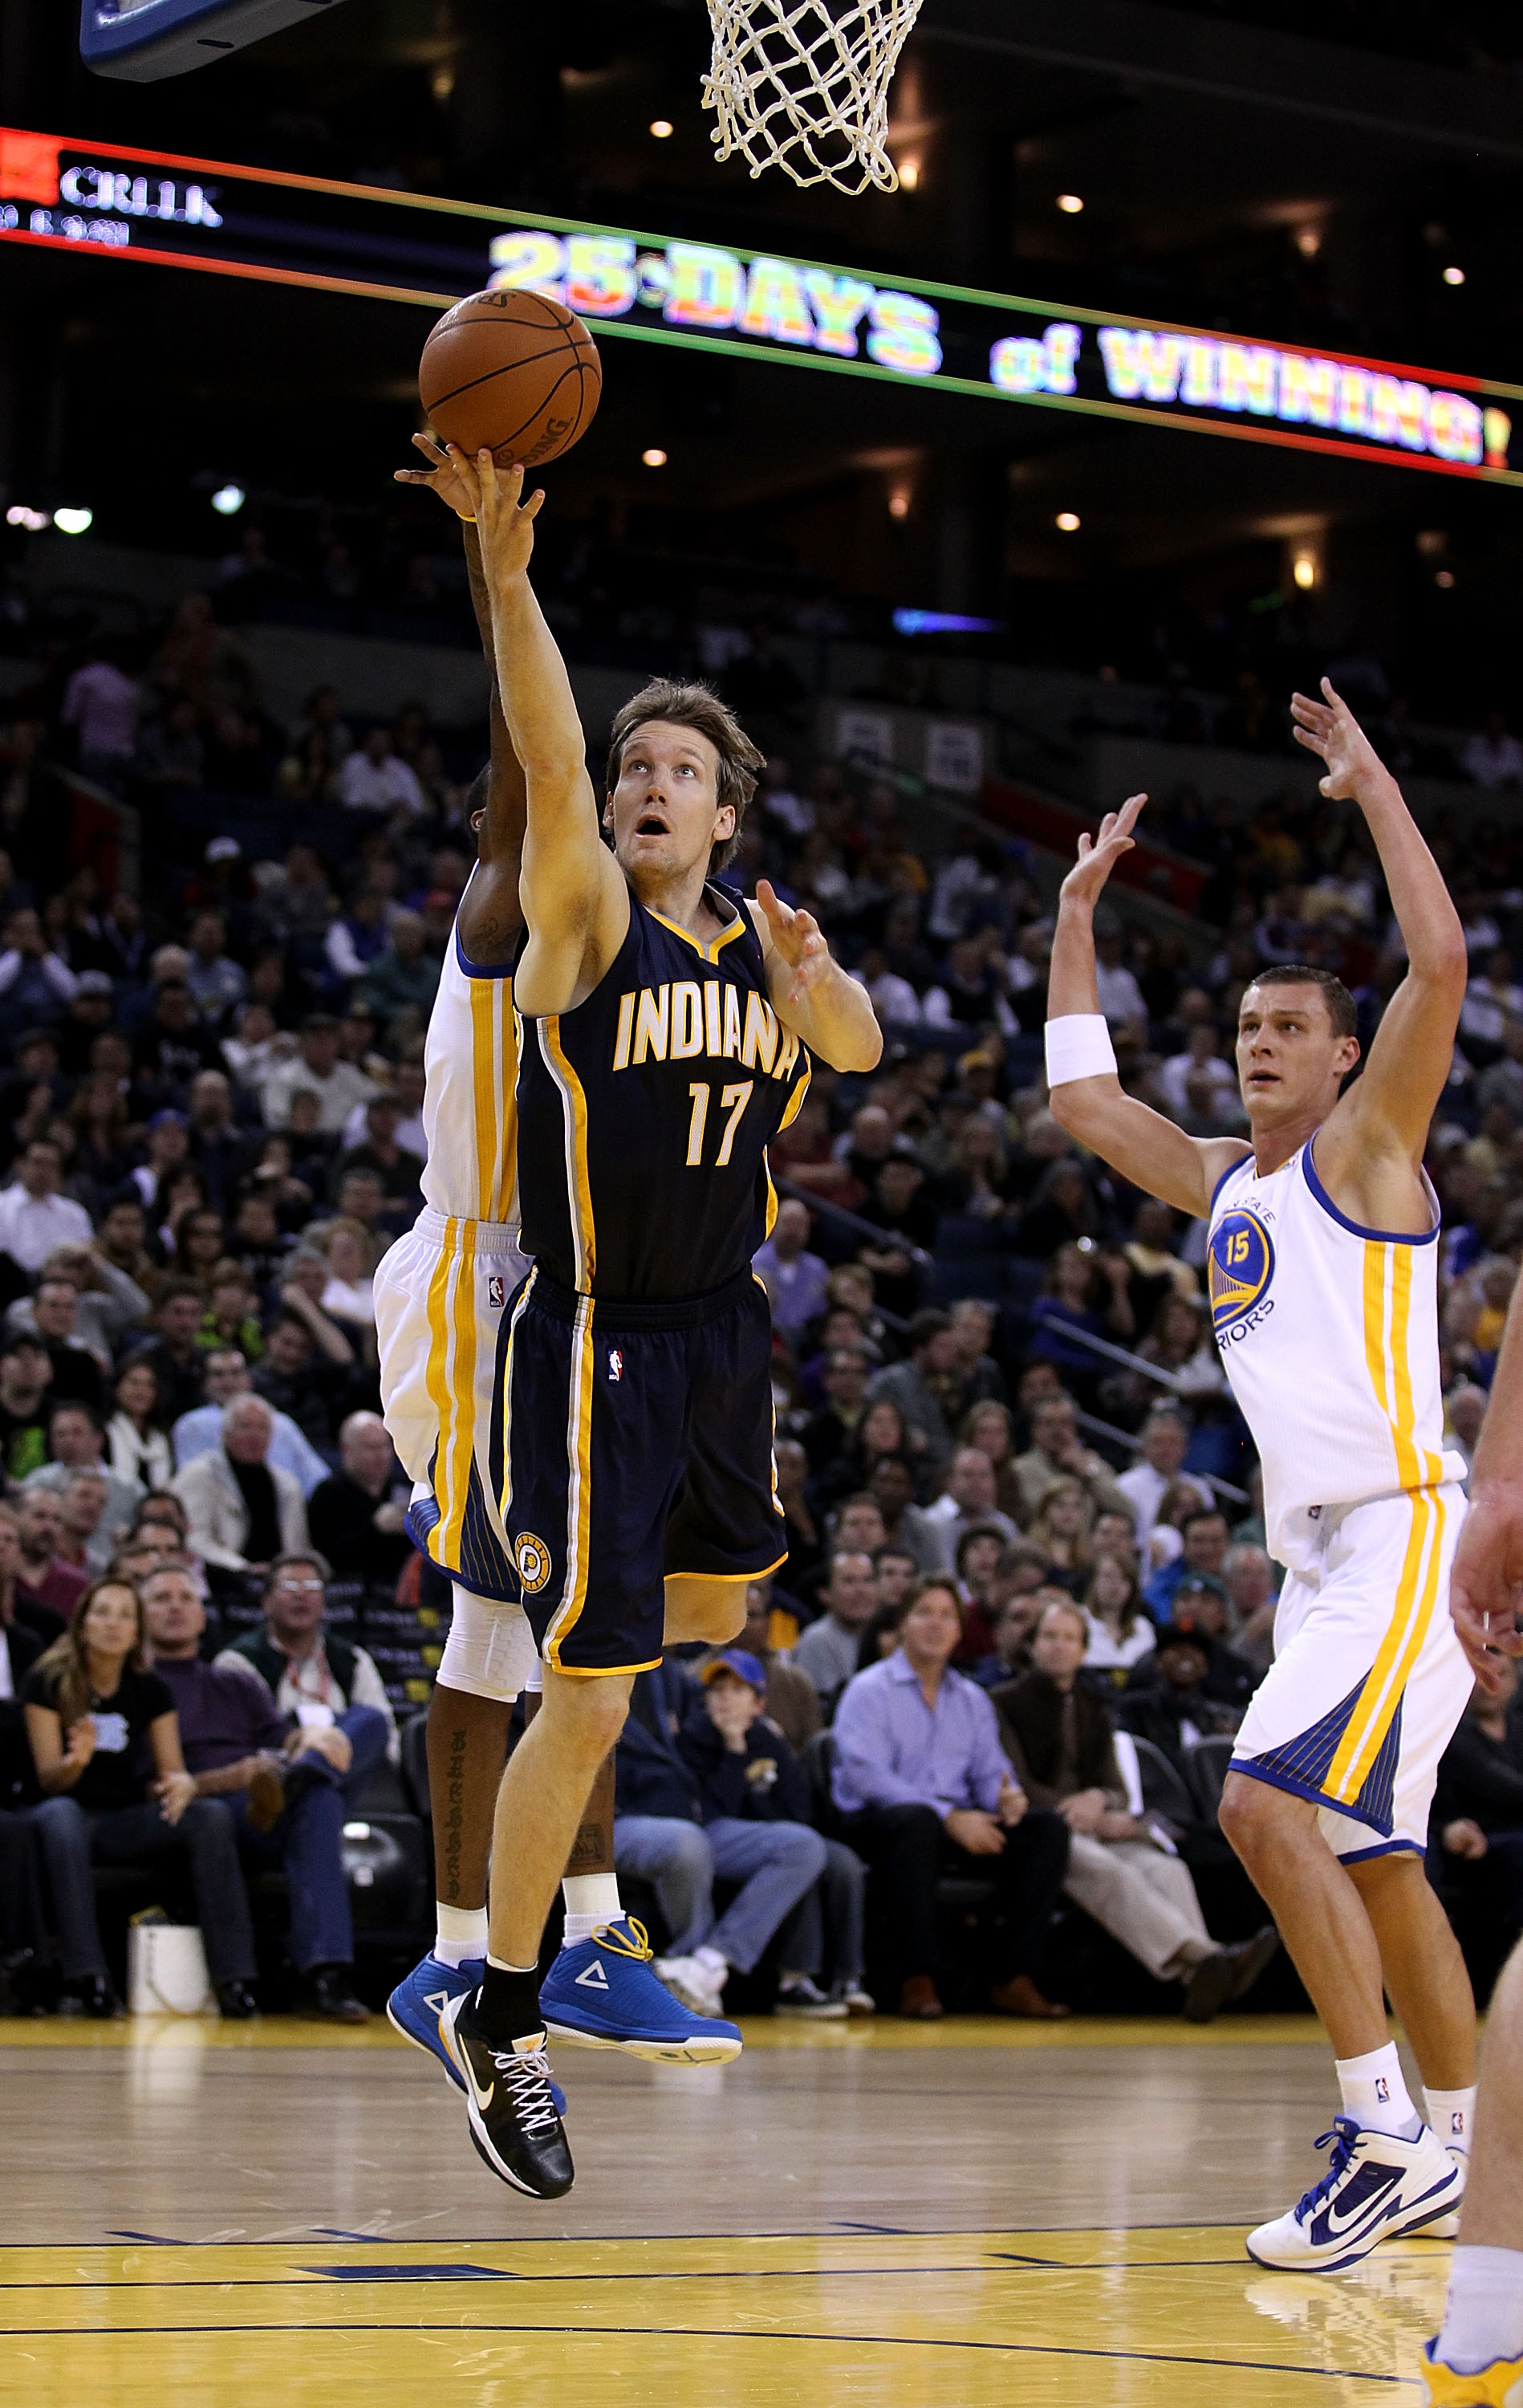 OAKLAND, CA - JANUARY 19:  Mike Dunleavy #17 of the Indiana Pacers goes up for a shot during their game against the Golden State Warriors at Oracle Arena on January 19, 2011 in Oakland, California.  NOTE TO USER: User expressly acknowledges and agrees tha